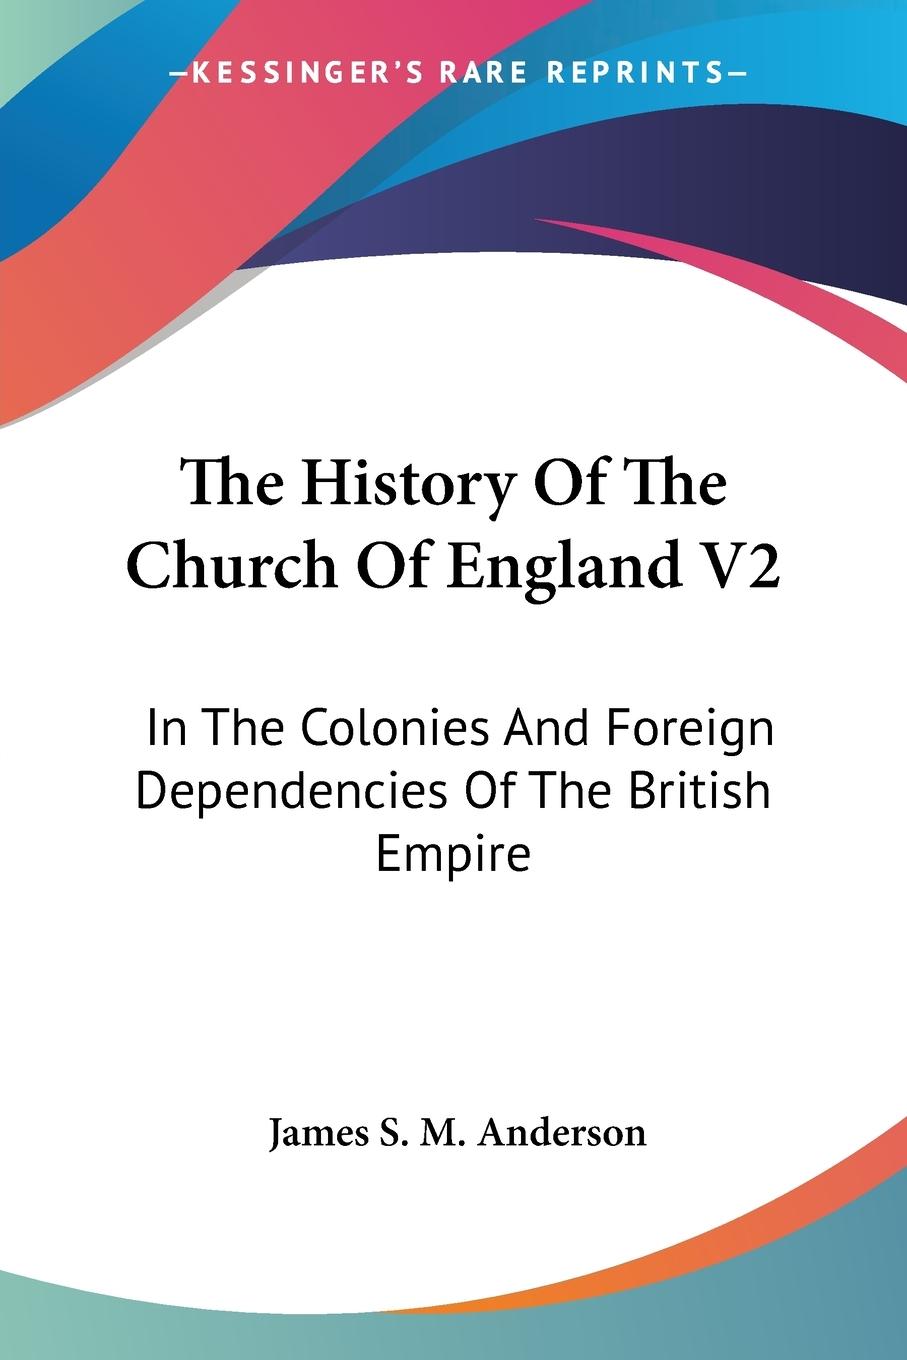 The History Of The Church Of England V2 - Anderson, James S. M.